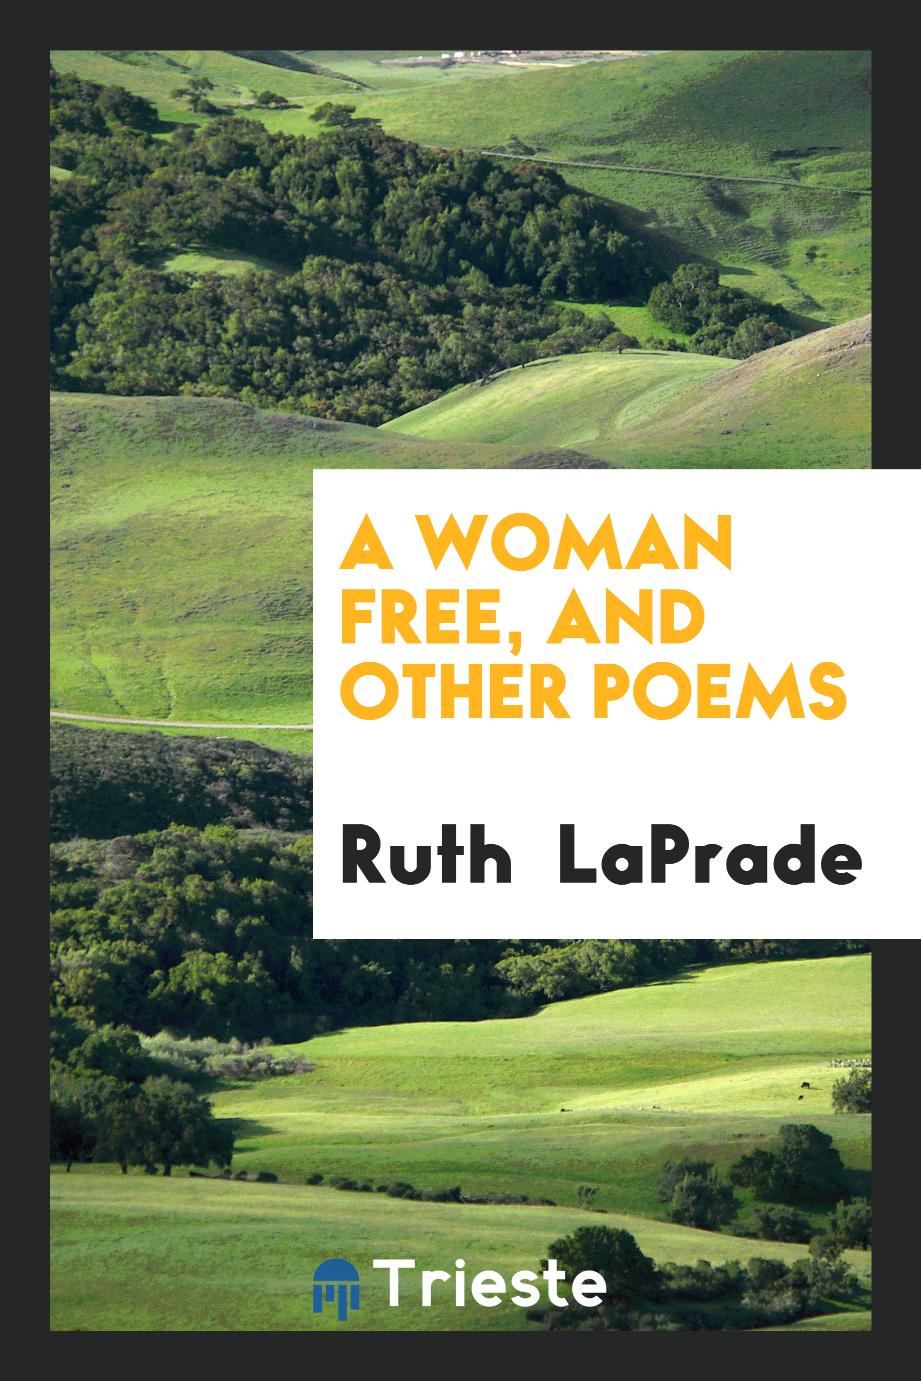 A Woman Free, and Other Poems